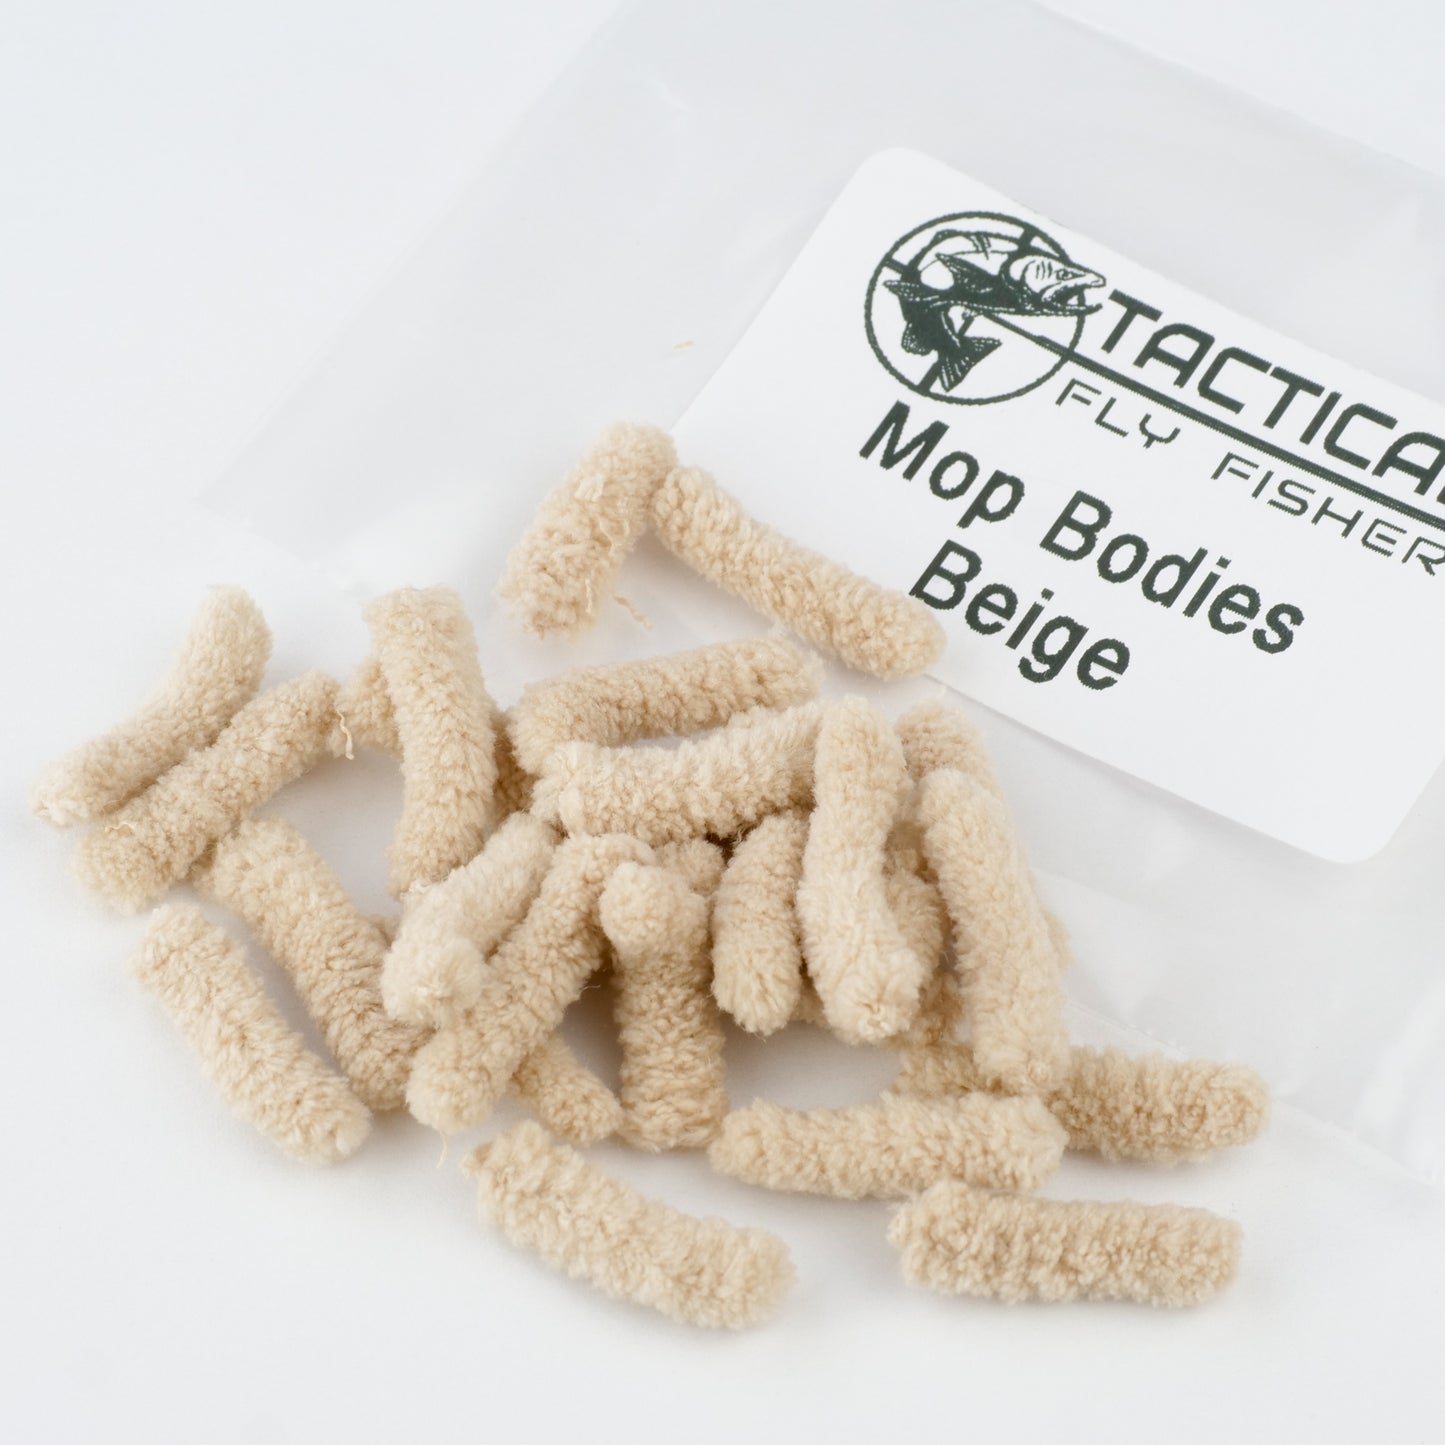 Mop Bodies (25 Pack)